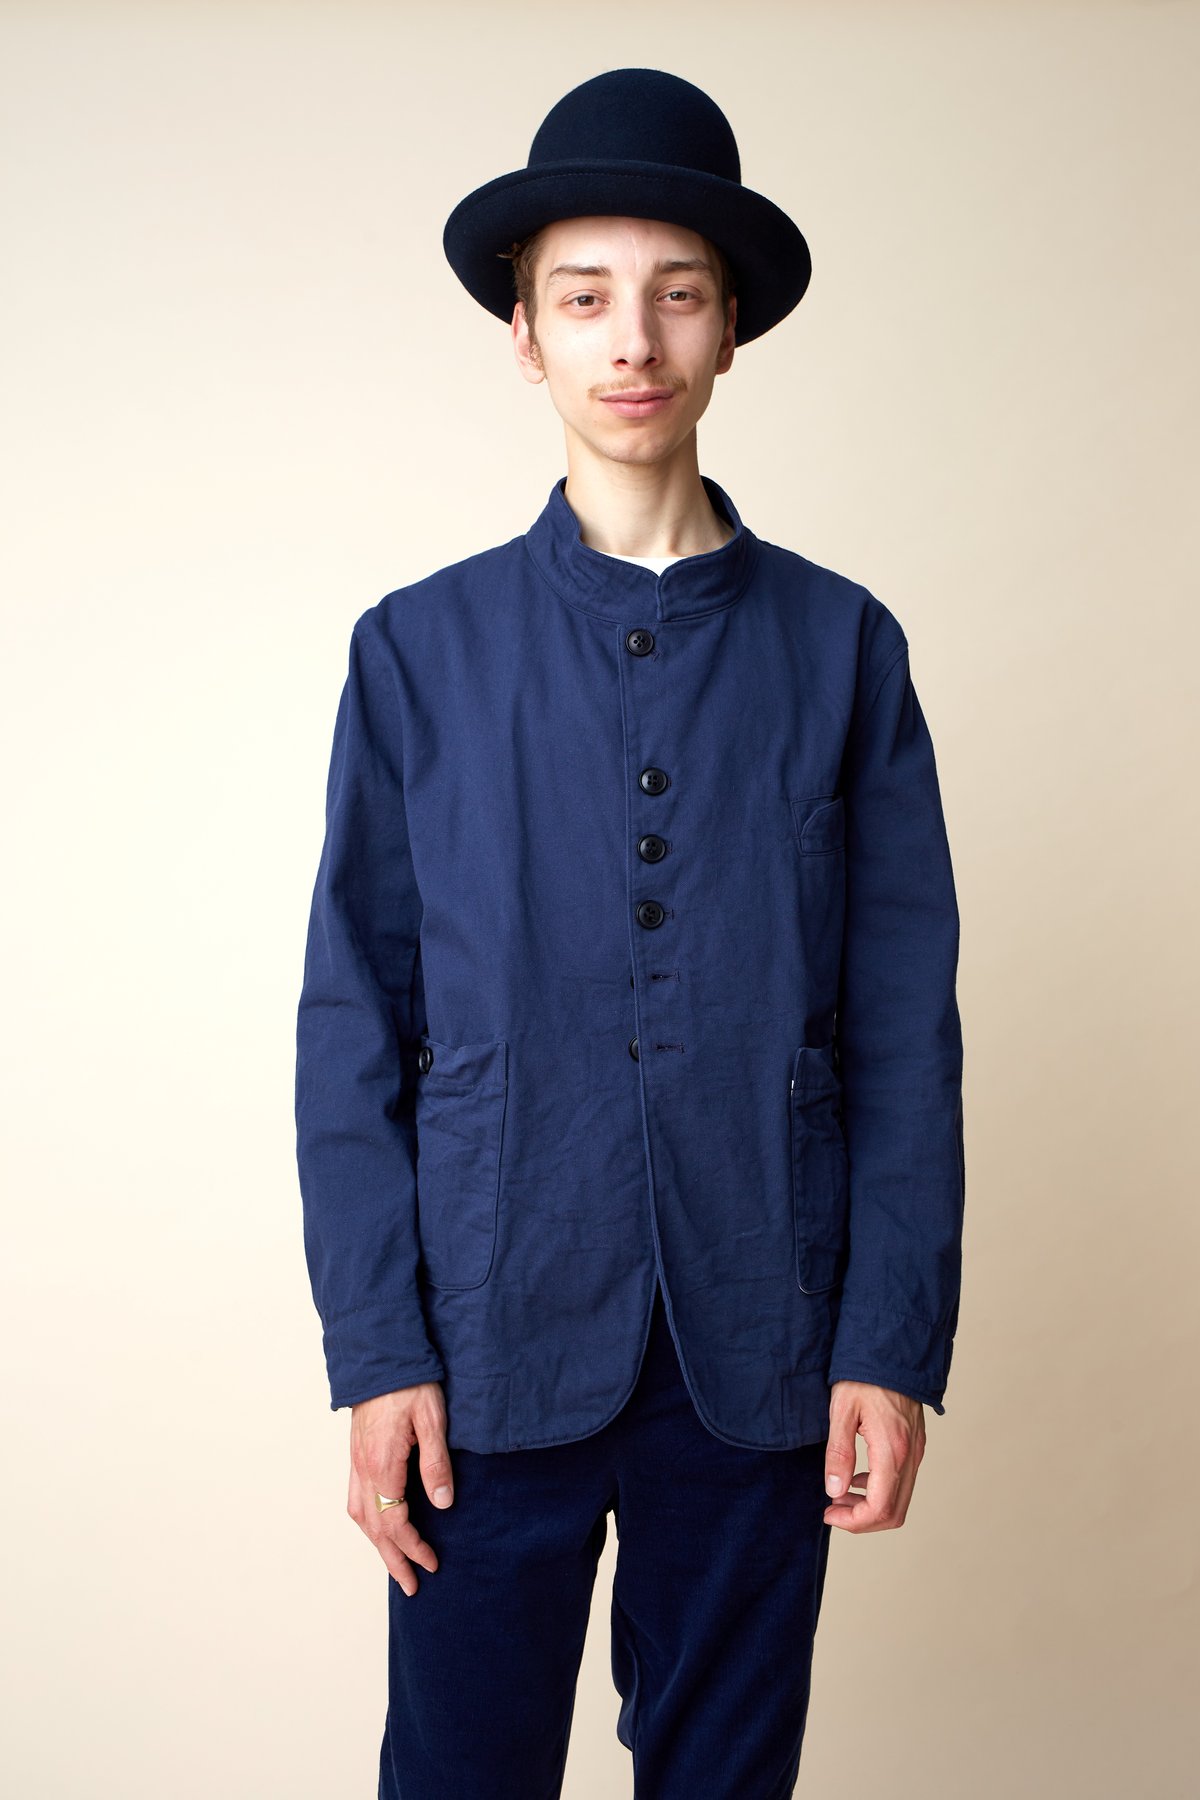 JOHNNY ROOSTER BYRON JACKET - Navy £387.00 | Workhouse England